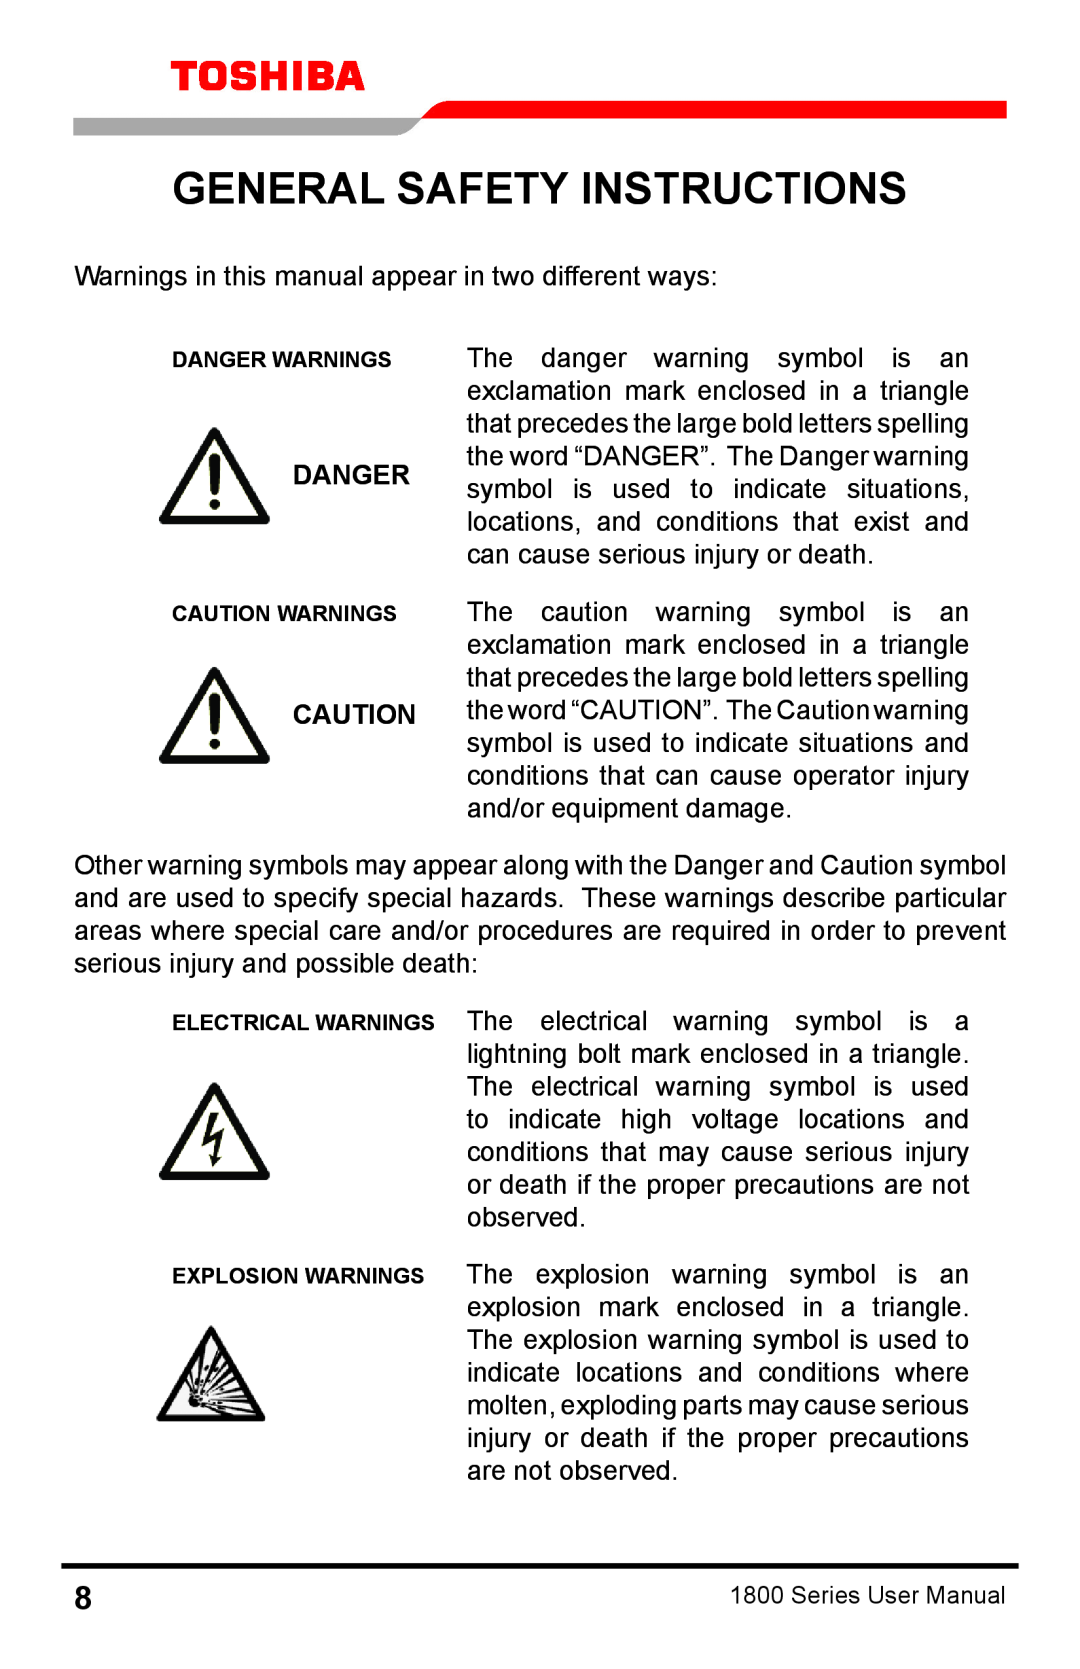 Toshiba 1800 manual General Safety Instructions, Danger 